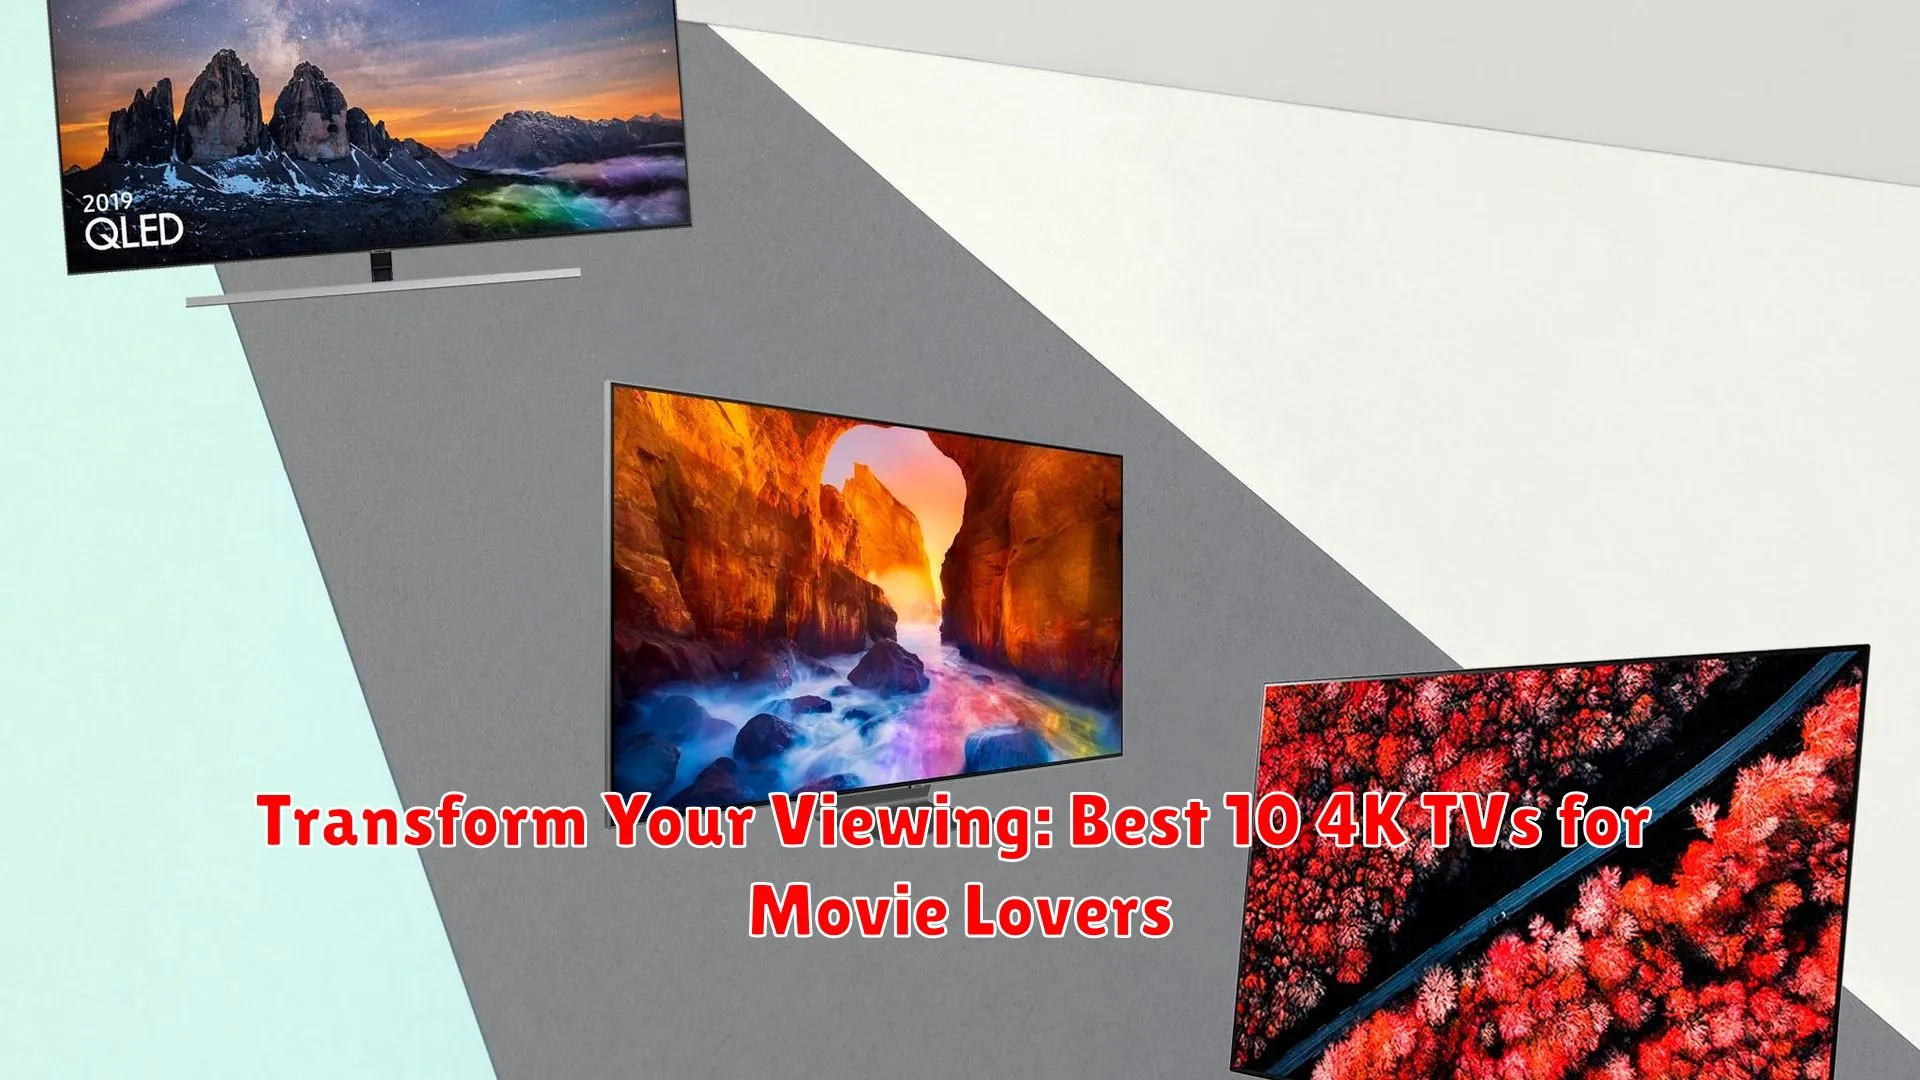 Transform Your Viewing: Best 10 4K TVs for Movie Lovers